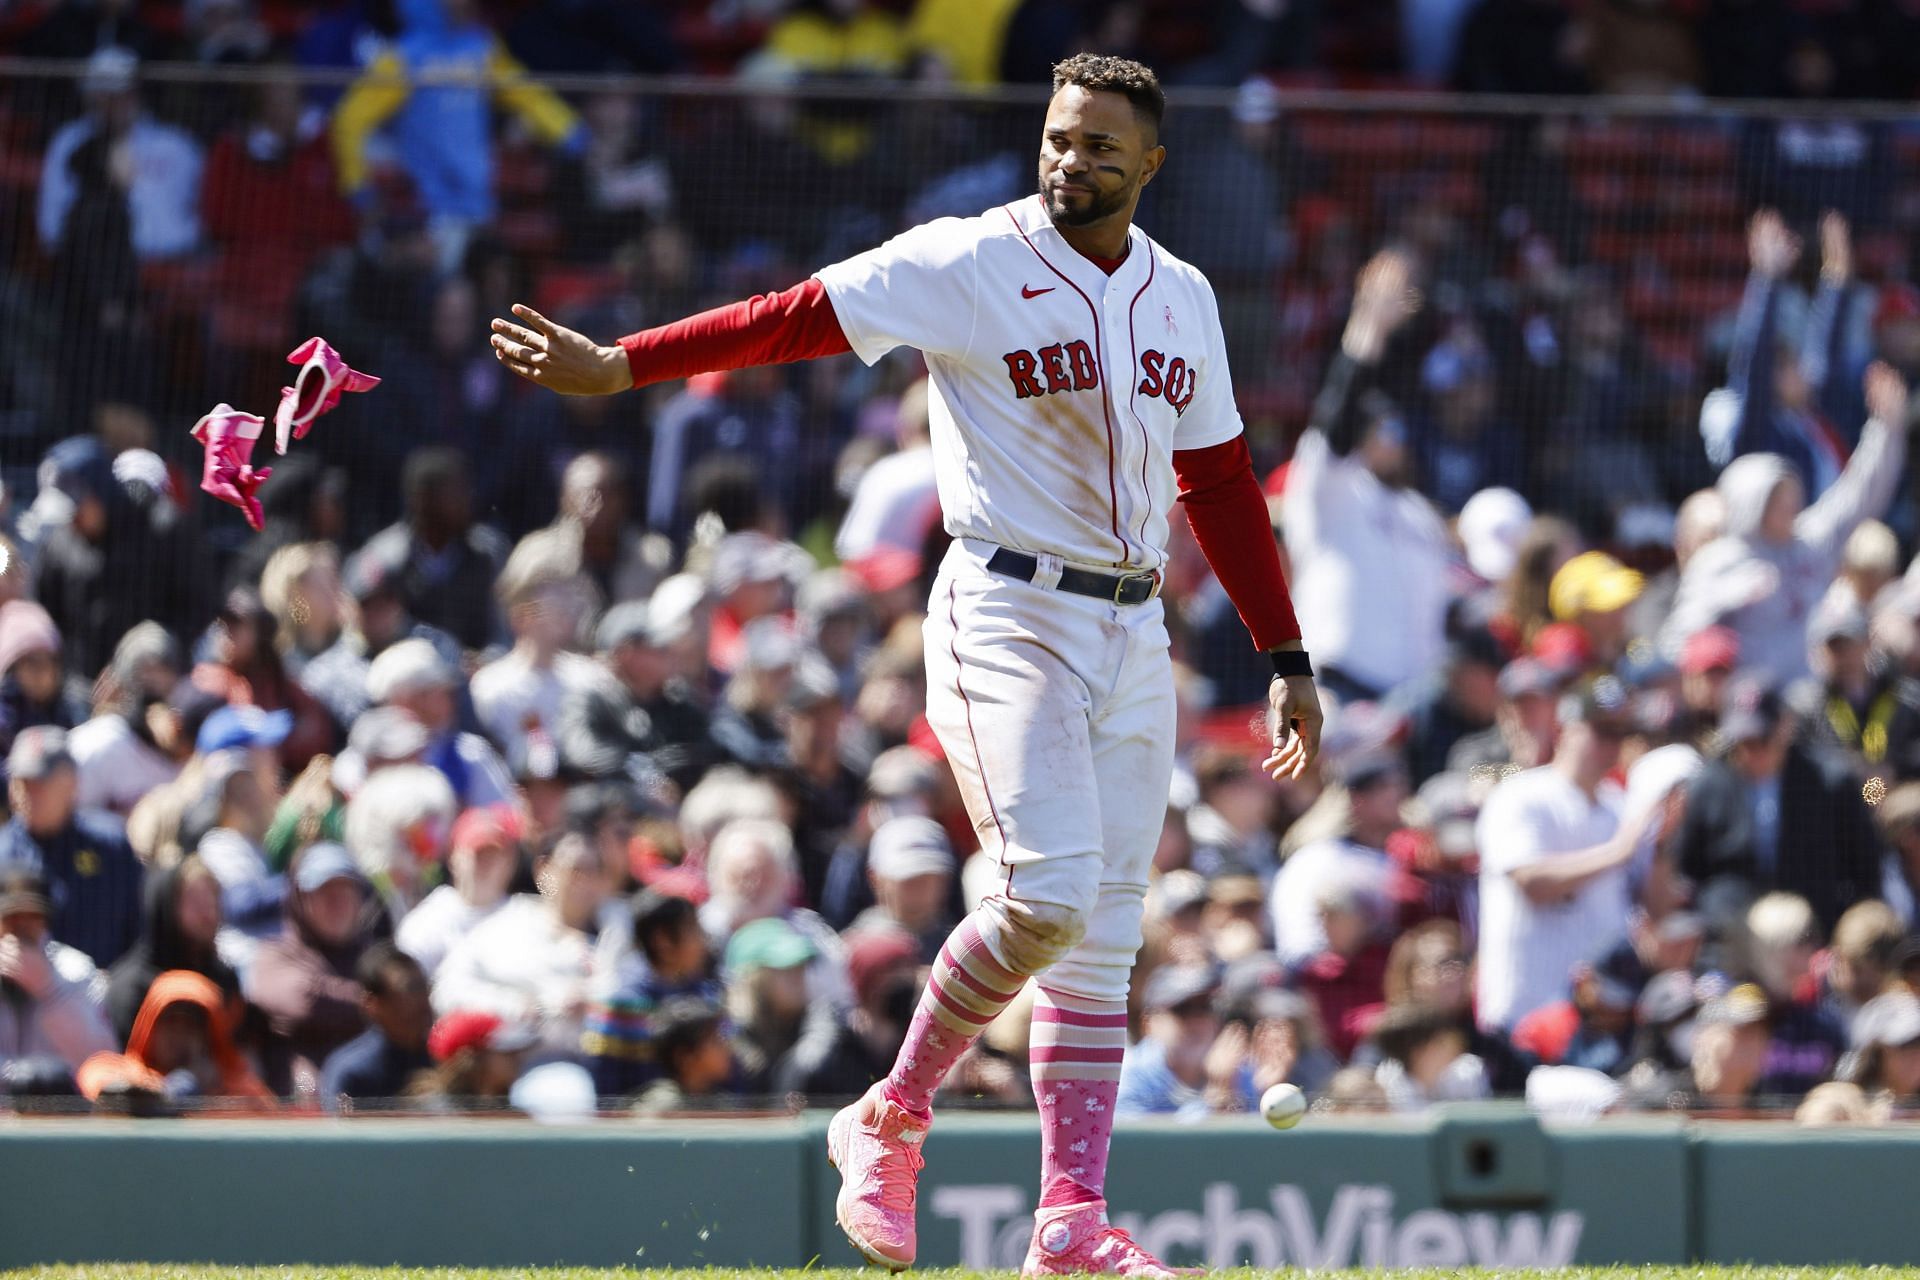 Boston Red Sox SS Xander Bogaerts is batting .343. His team is 10-19.